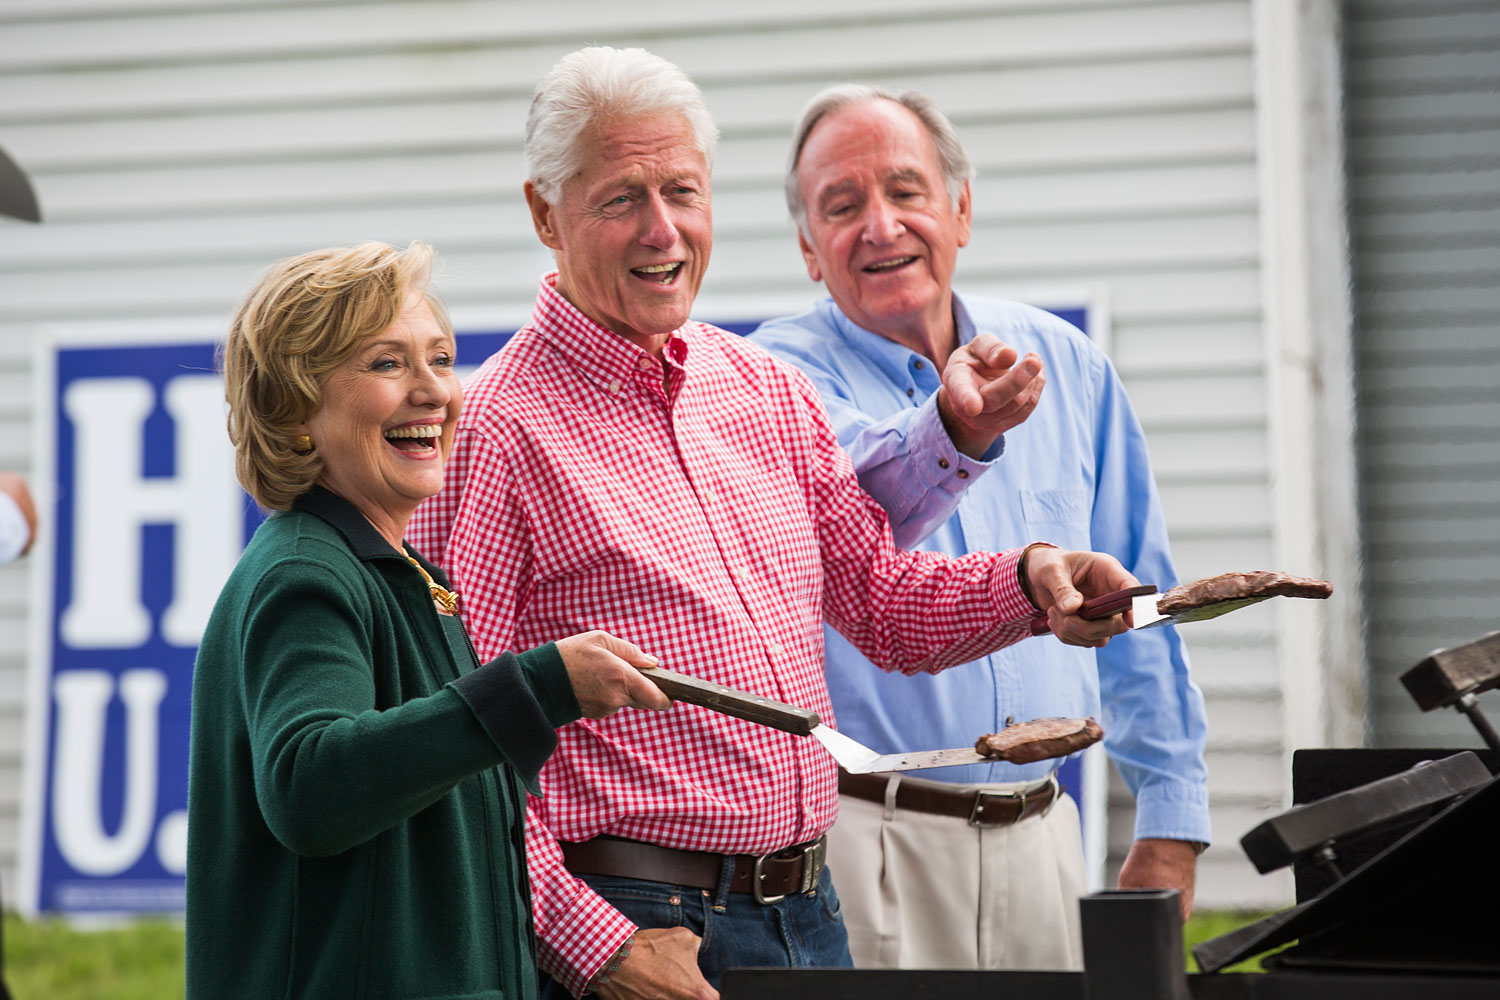 Hillary and Bill Clinton cook steaks with Iowa Senator Tom Harken at his annual Steak Fry in Indianola, Iowa, on Sept. 14, 2014 (Brooks Kraft—Corbis for TIME)